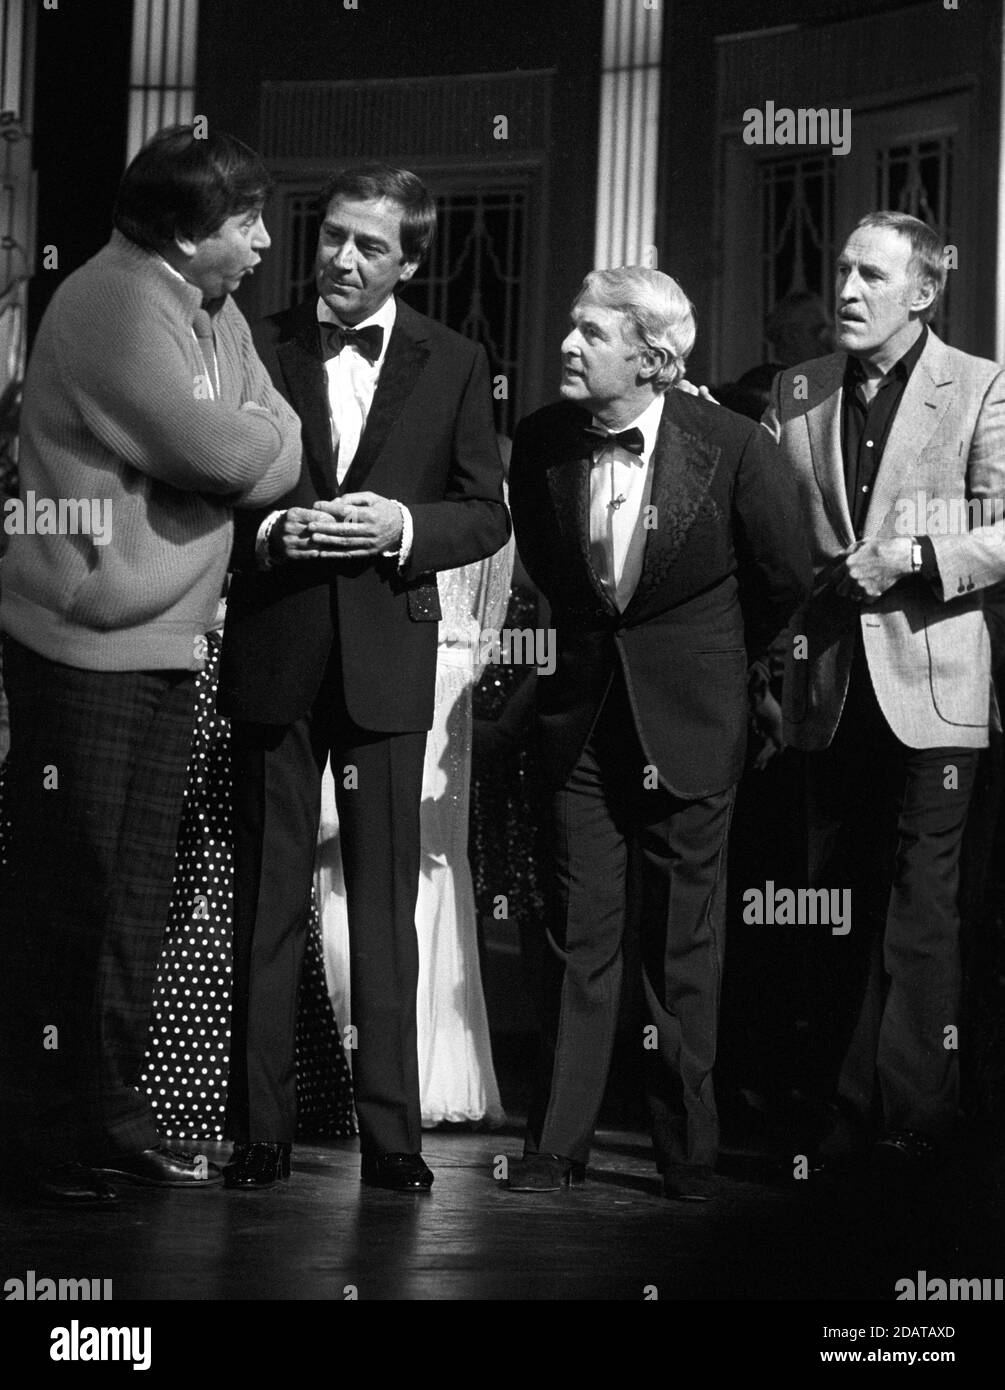 File photo dated 09/11/84 of (Left to Right) comedians Jimmy Tarbuck, Des O'Connor, Ernie Wise and Bruce Forsyth at the London Palladium. Des O'Connor (2nd from left), sadly passed away on Saturday 14 November aged 88. His agent confirmed he had been admitted to hospital just over a week ago, following a fall at his home in Buckinghamshire. Unfortunately yesterday evening his condition suddenly deteriorated and he drifted peacefully away in his sleep. Stock Photo